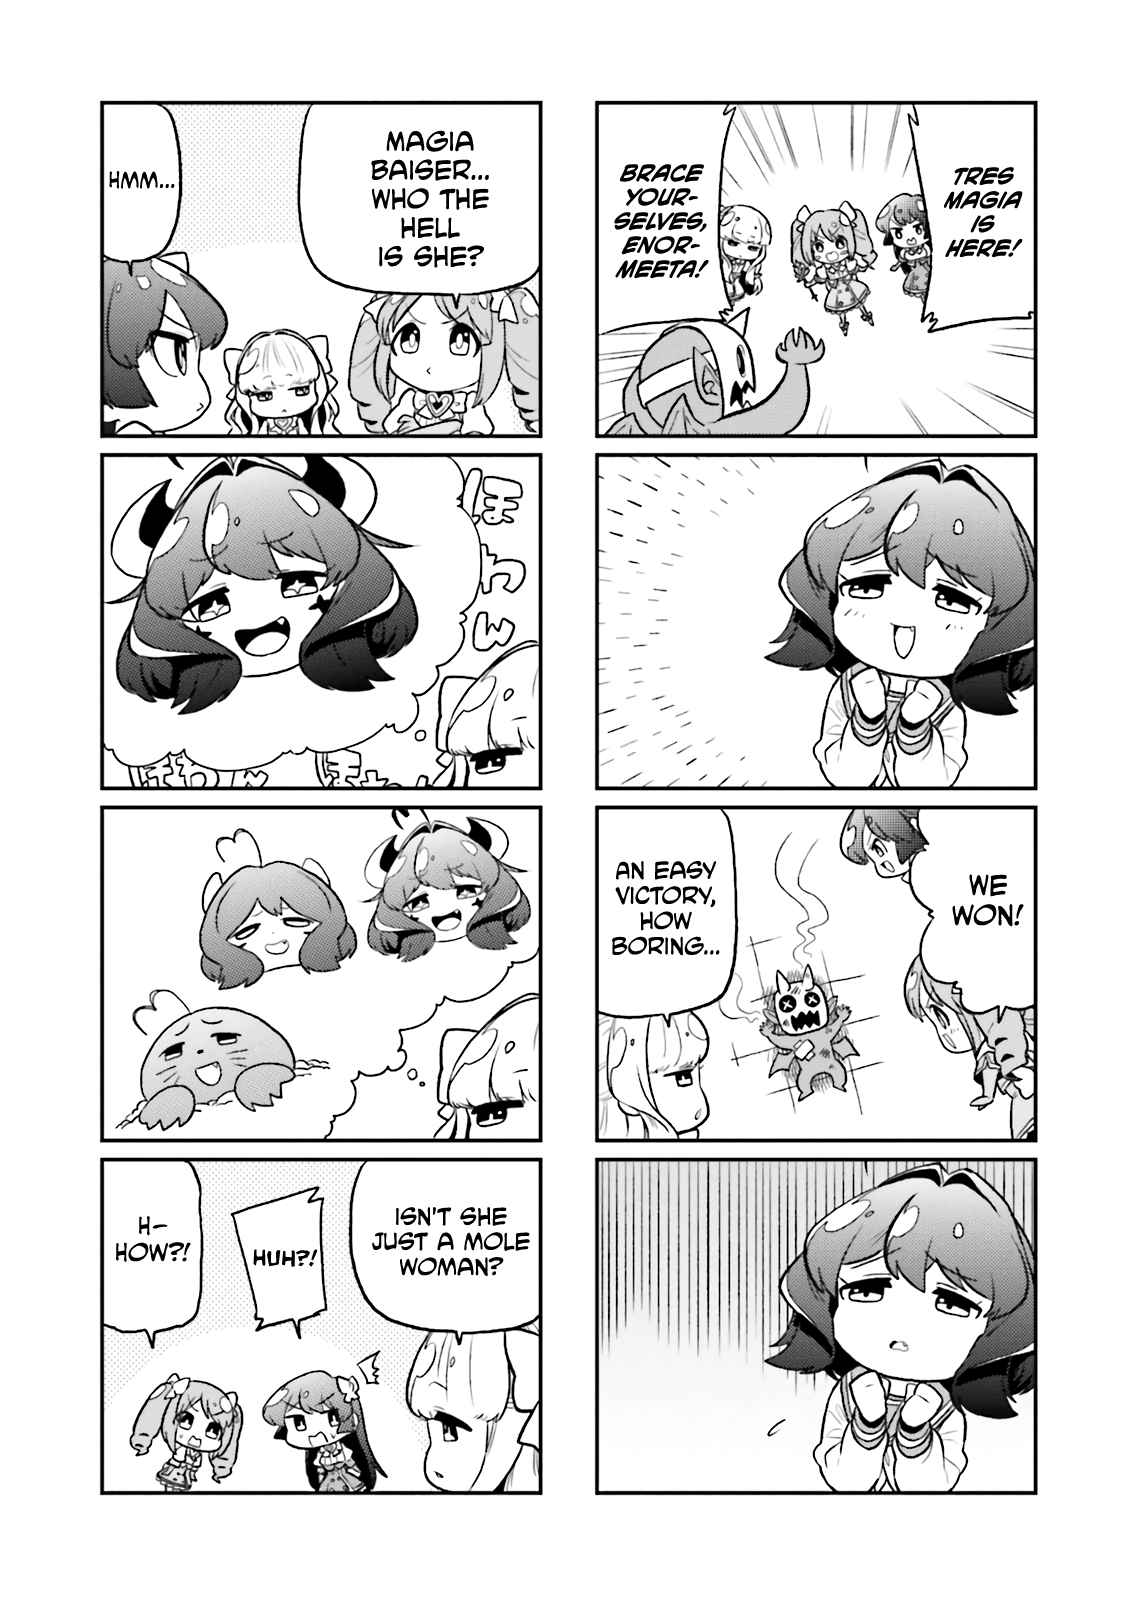 Looking Up To Magical Girls Vol. 1 Ch. 5.5